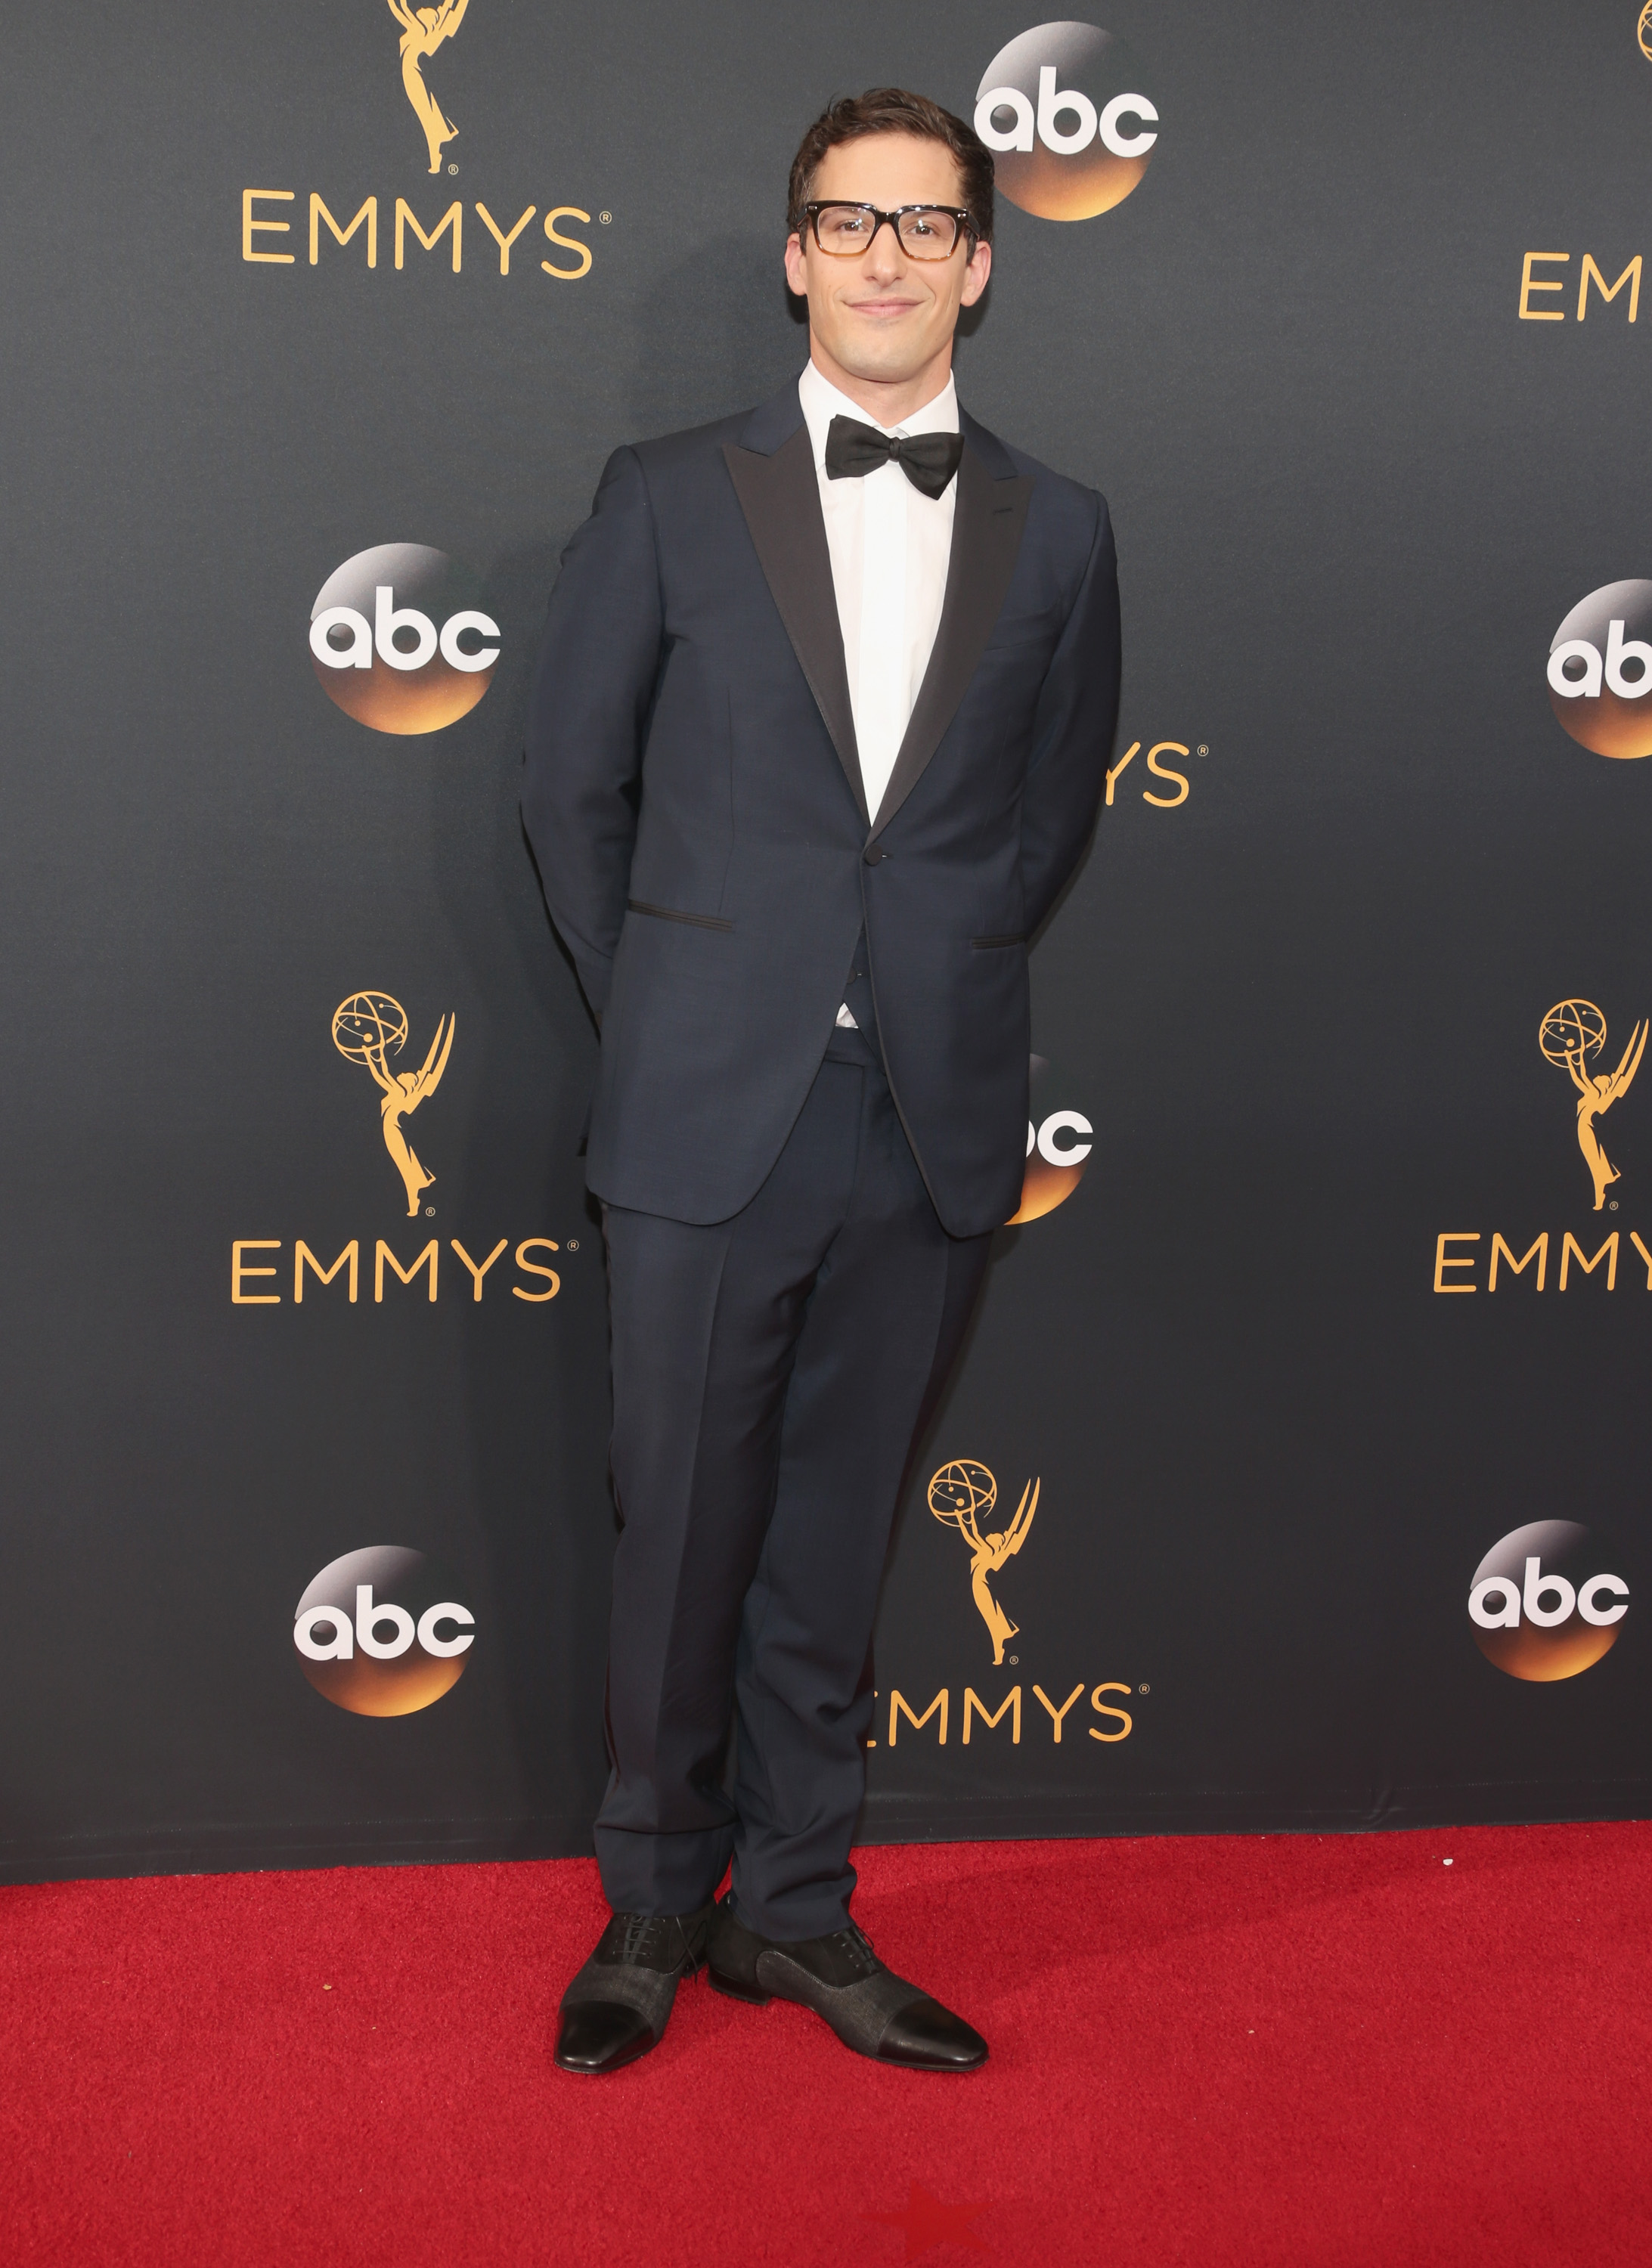 Andy Samberg arrives at the 68th Annual Primetime Emmy Awards at Microsoft Theater on September 18, 2016 in Los Angeles.